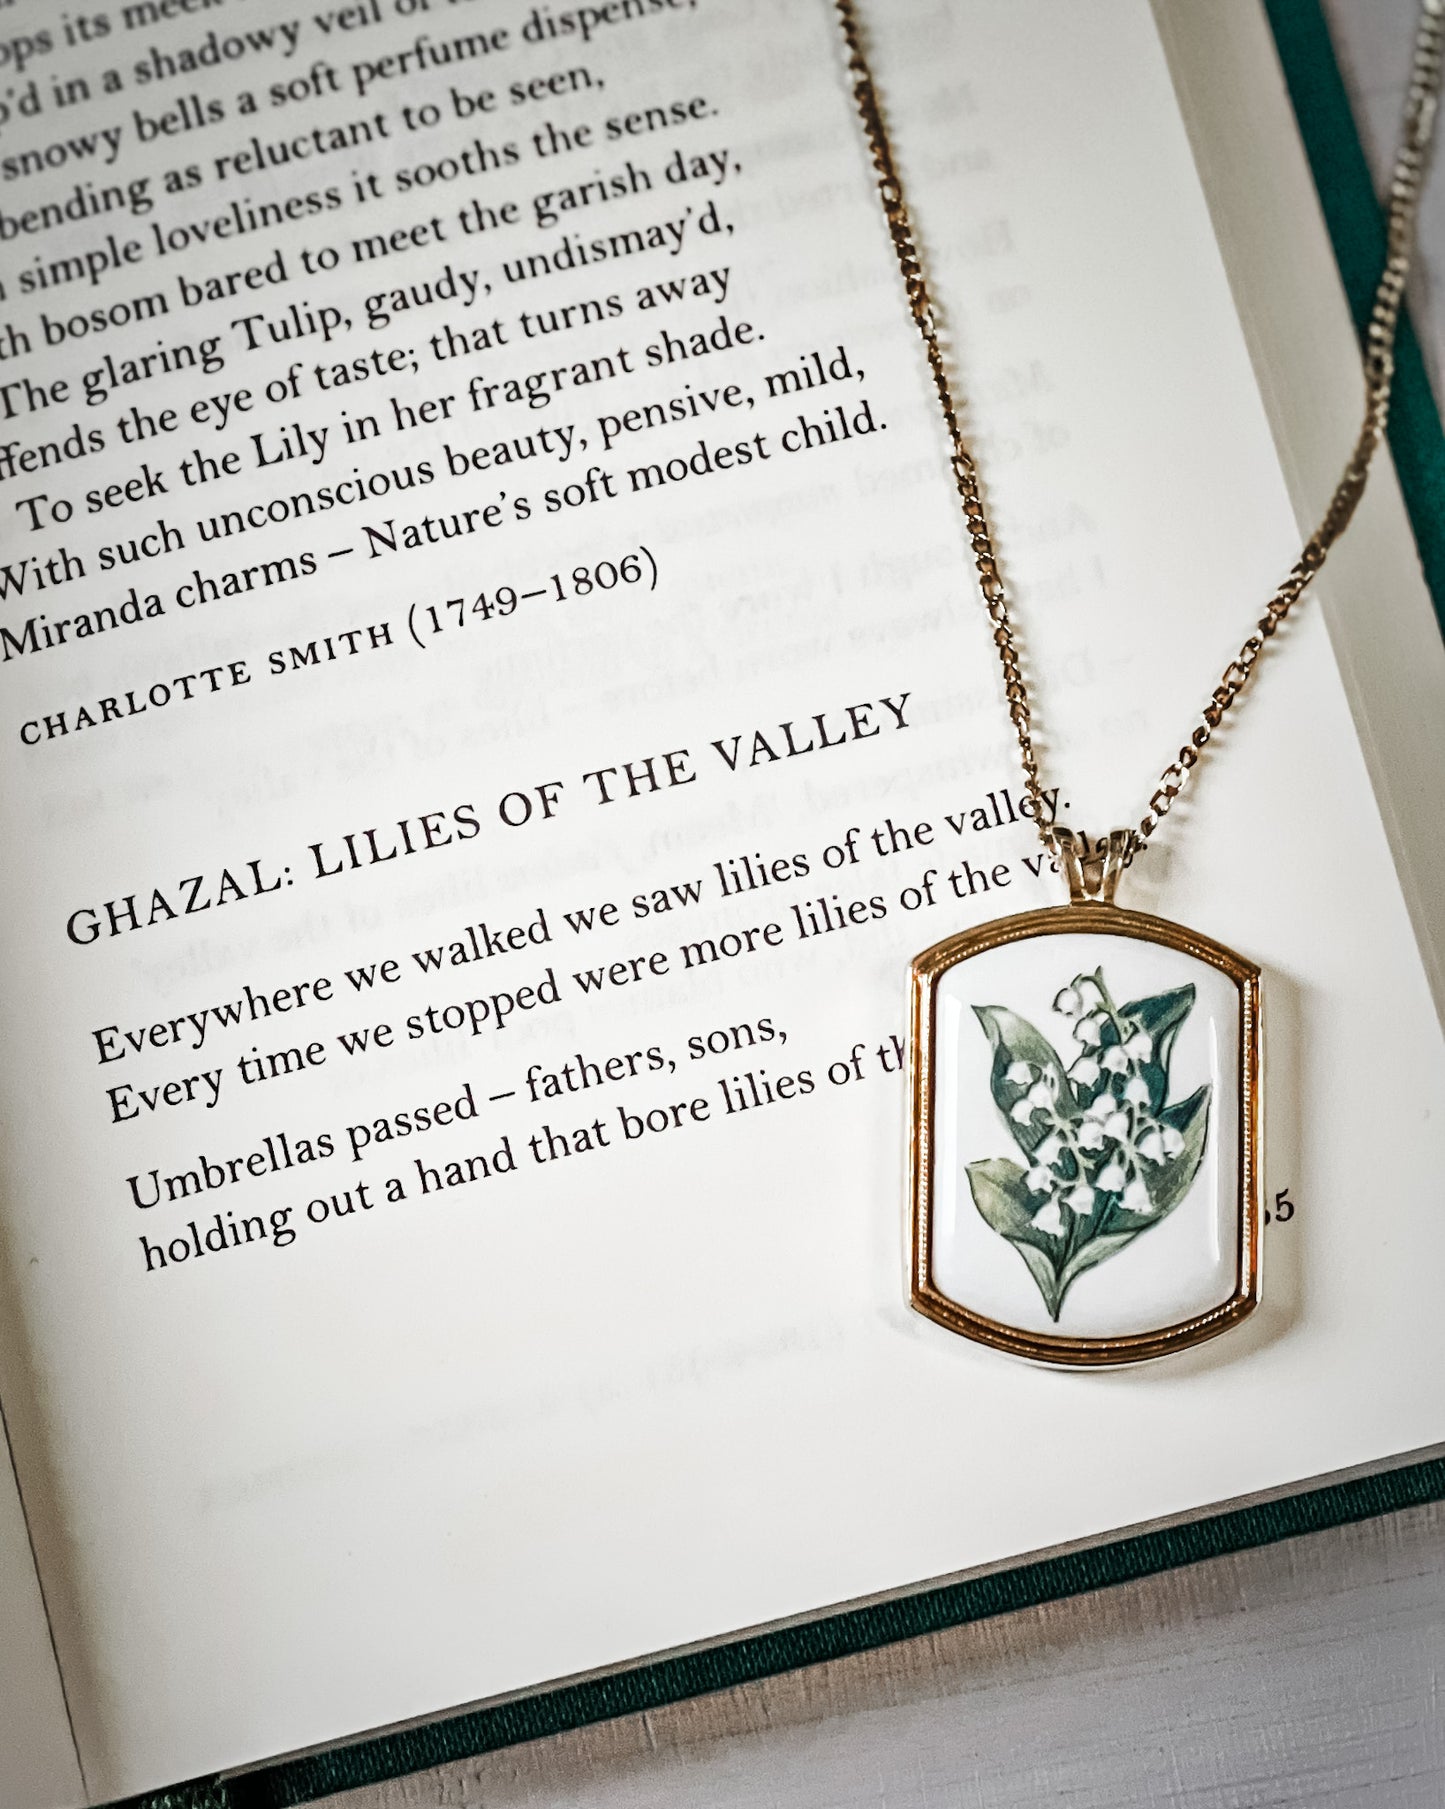 Vintage lily of the valley necklace